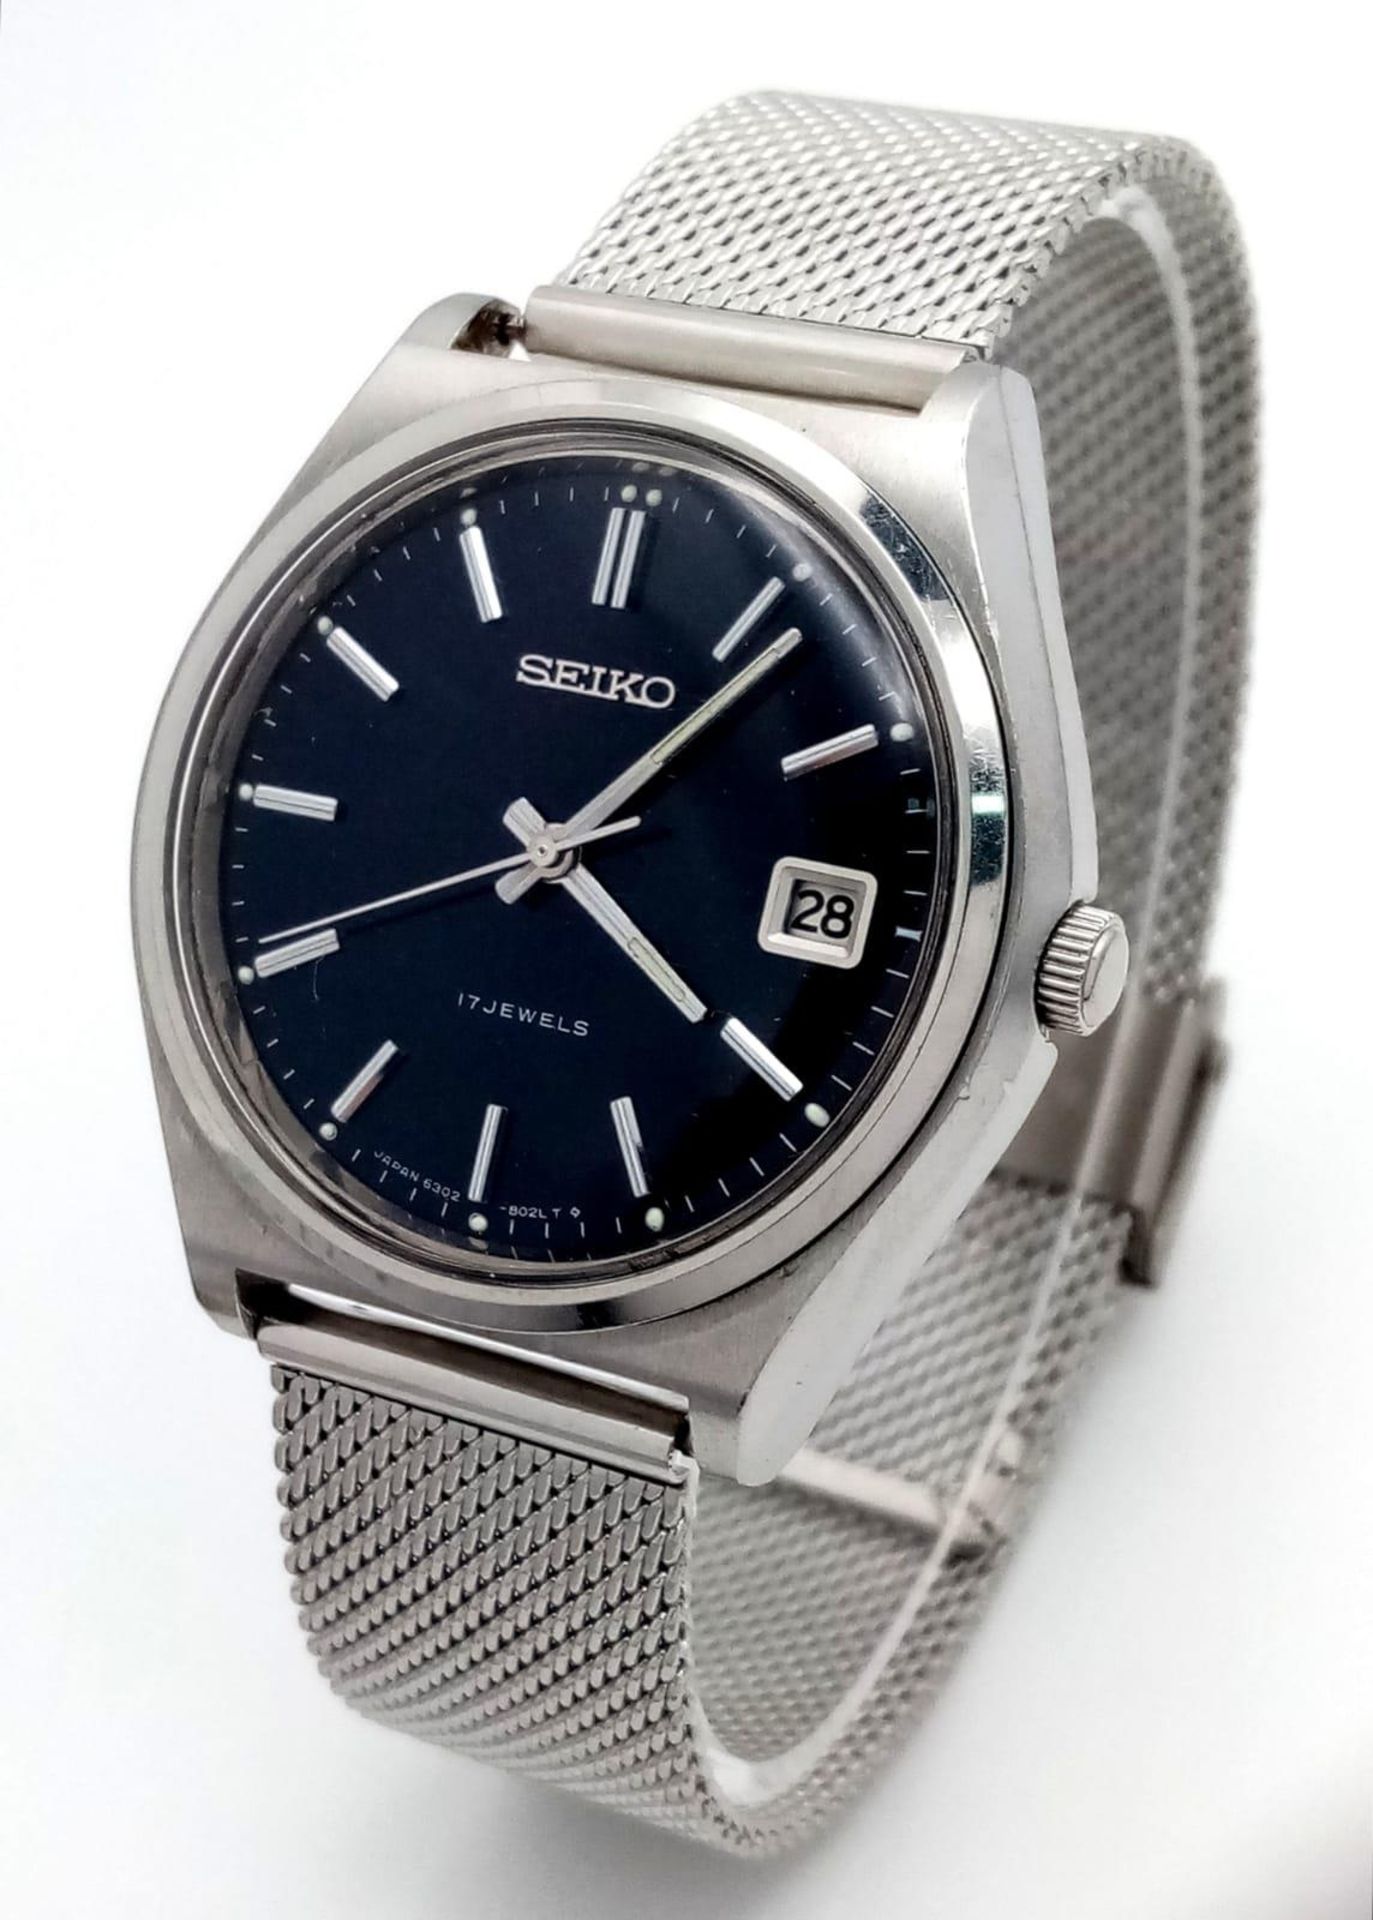 A Vintage Seiko Automatic Gents Watch. Stainless steel bracelet and case - 38mm. Blue dial with date